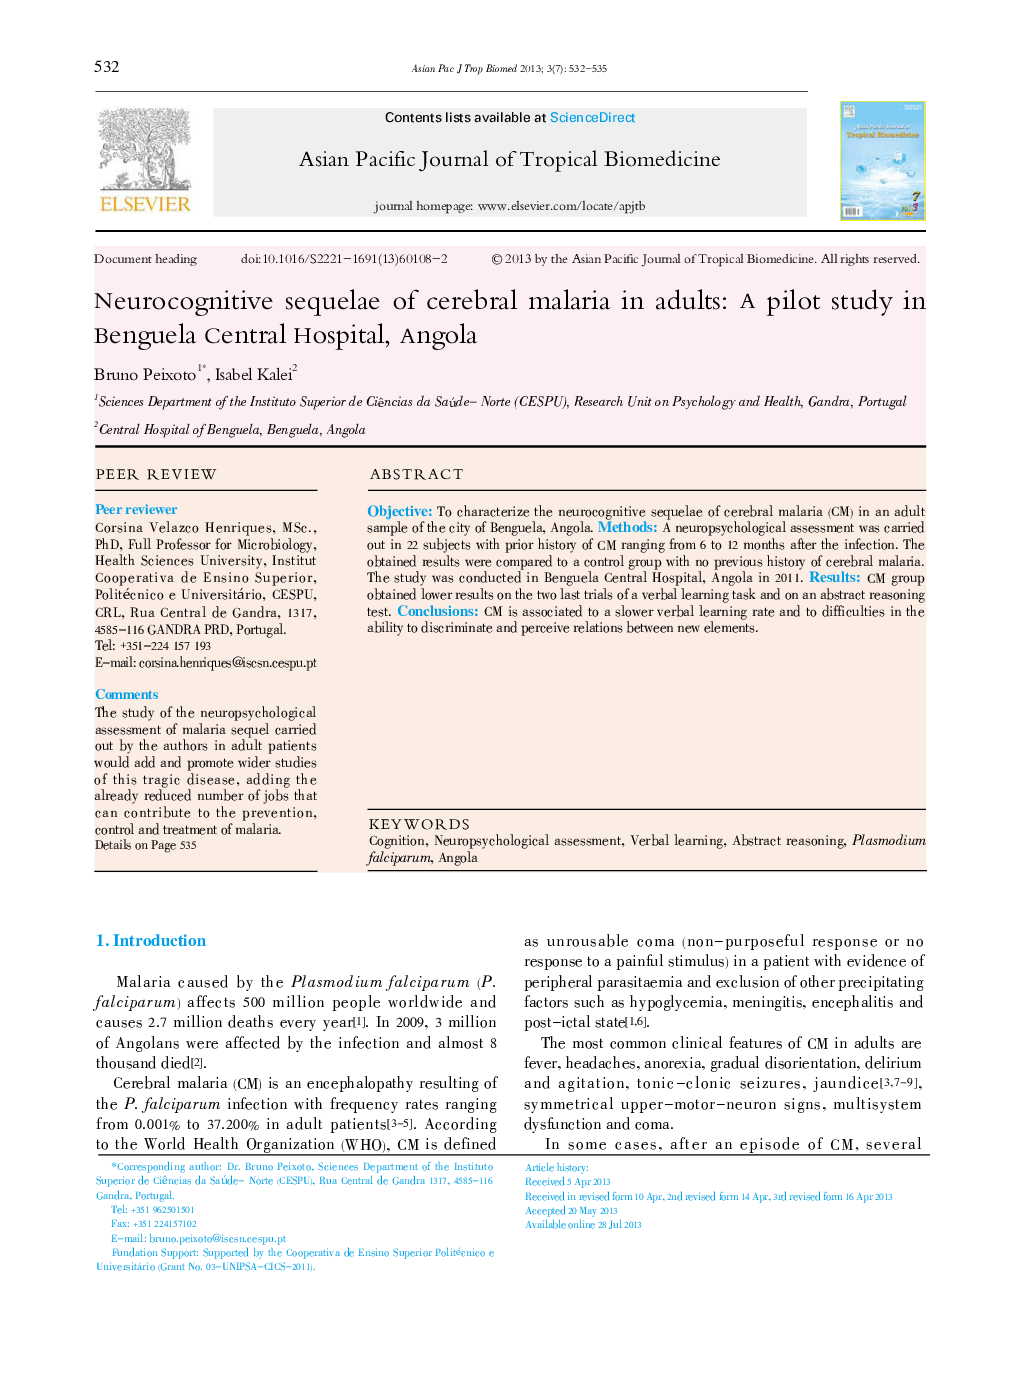 To characterize the neurocognitive sequelae of cerebral malaria (CM) in an adult sample of the city of Benguela, Angola